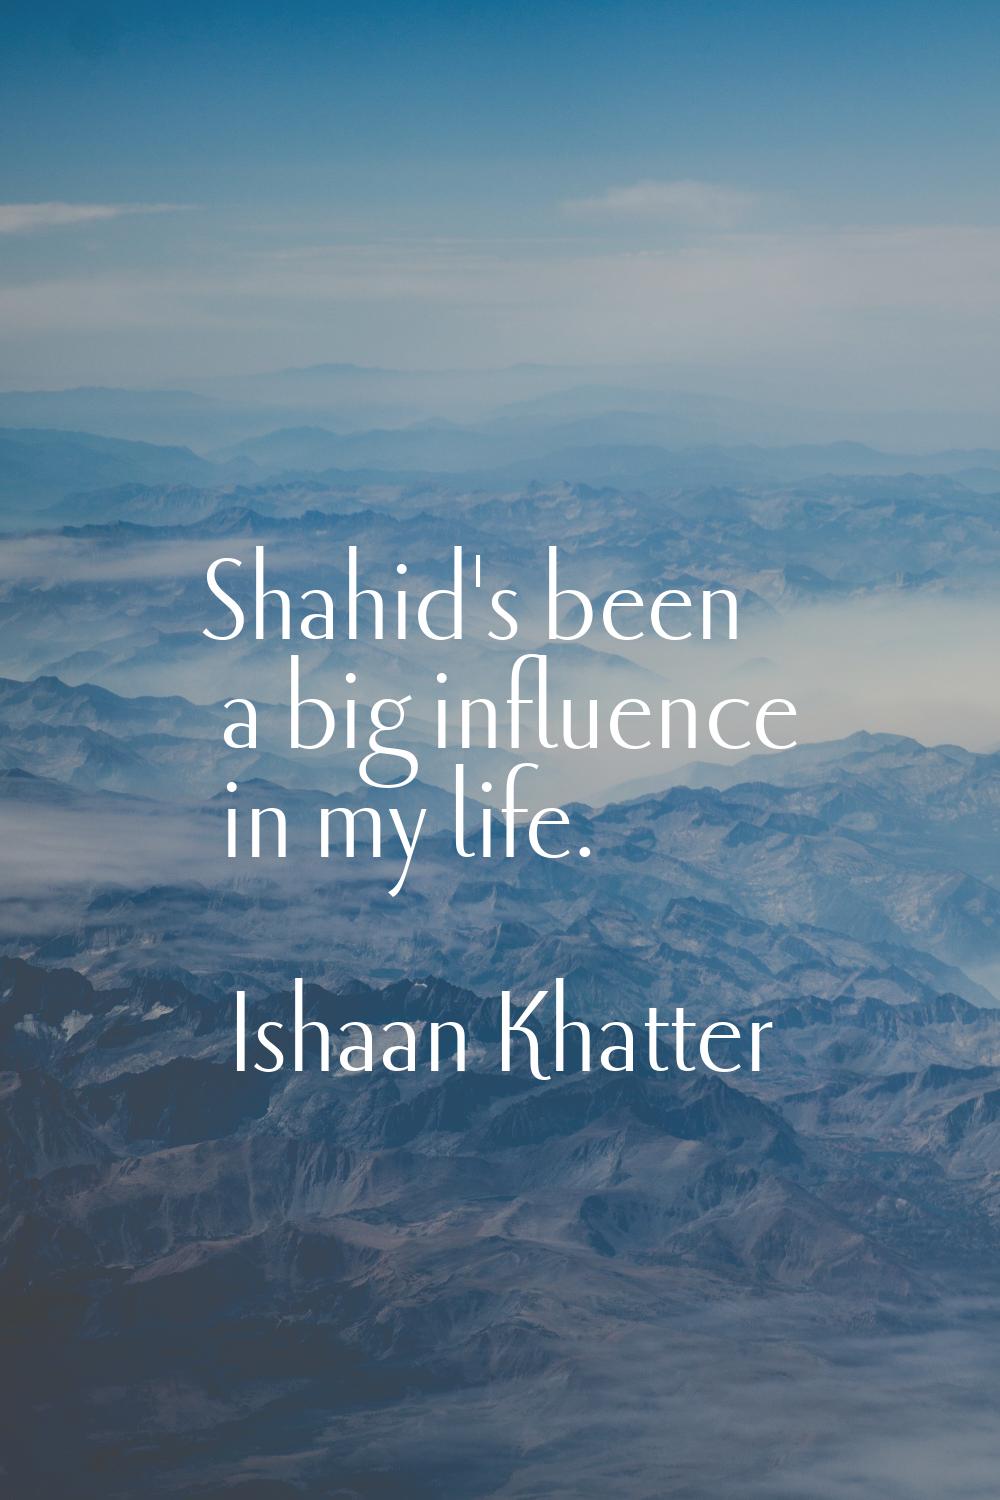 Shahid's been a big influence in my life.